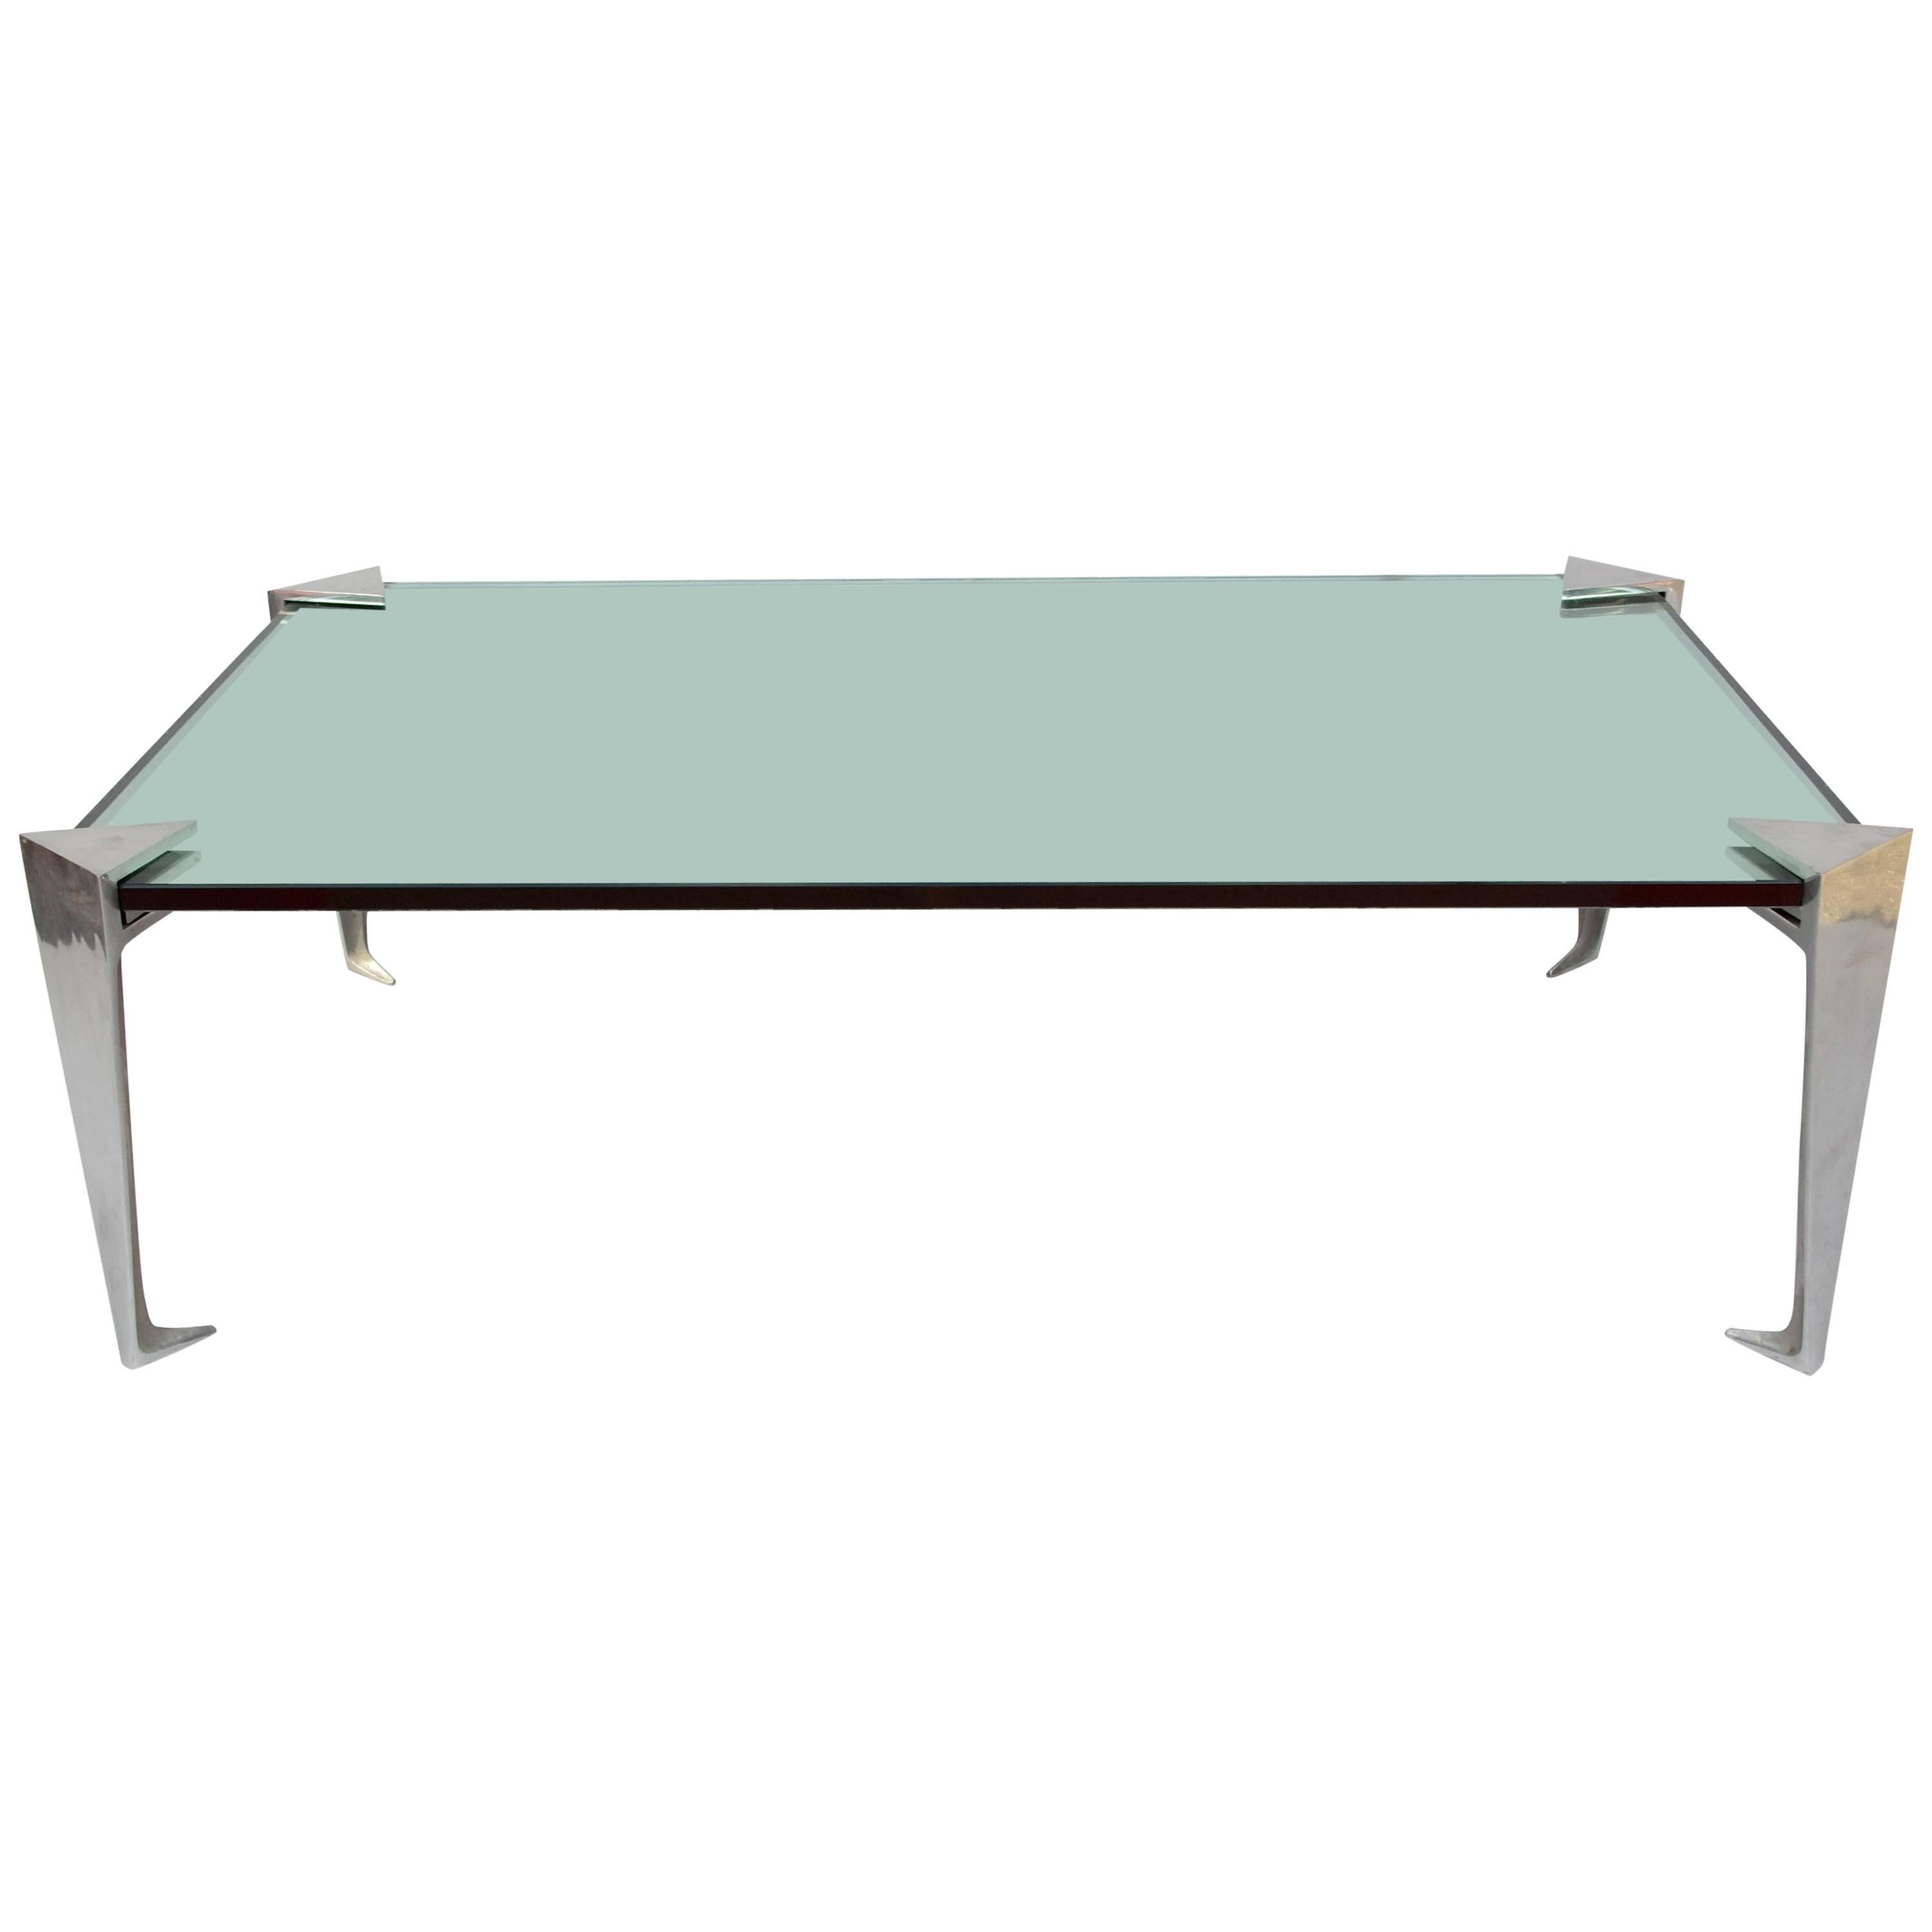 Aluminium and Mirror Top Coffee Table from 1980